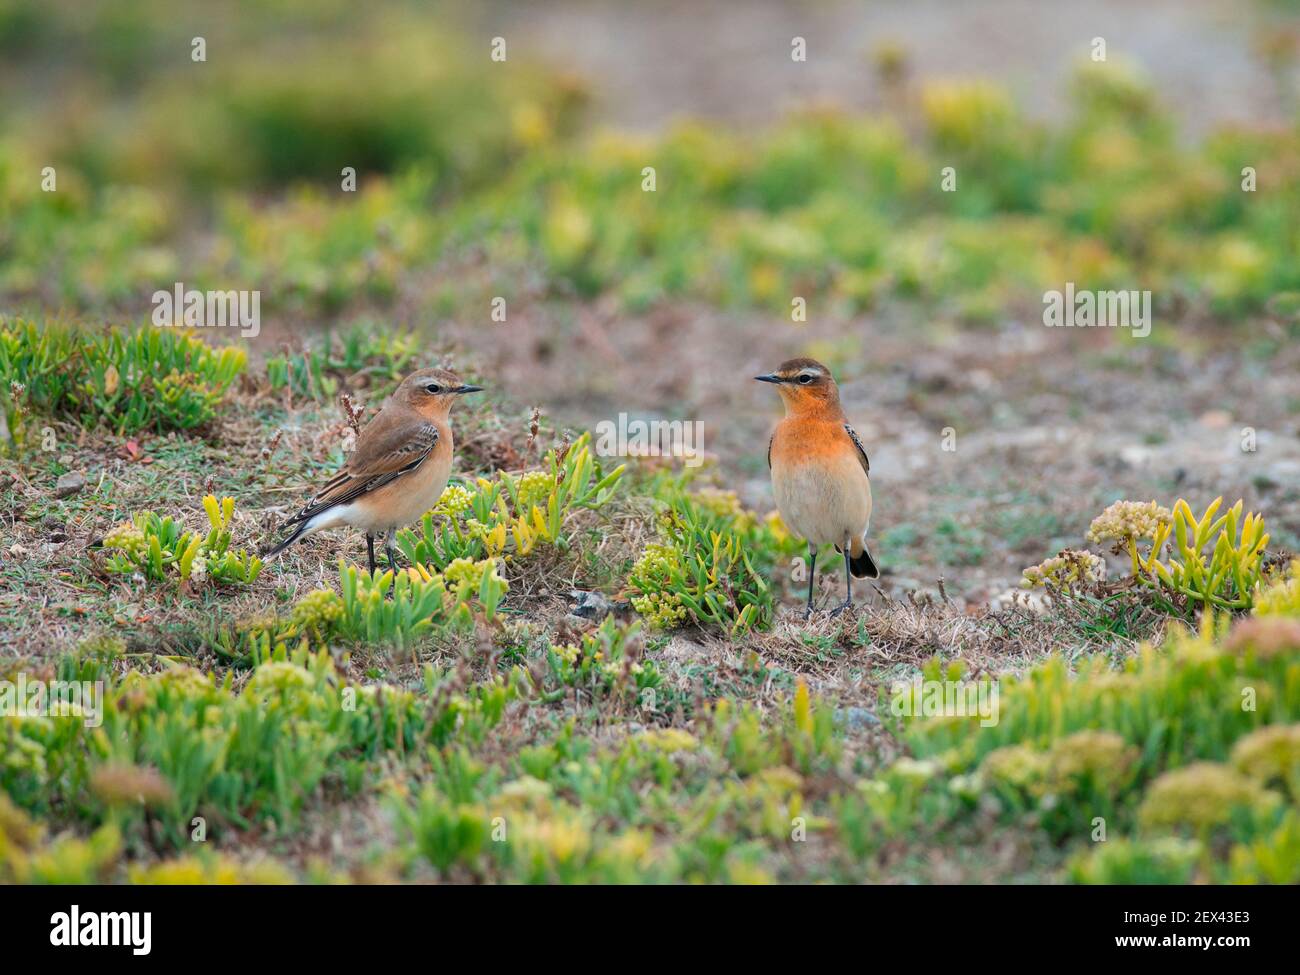 Northern wheatear (Oenanthe oenanthe) in Sea fennel (Crithmum maritimum), Brittany, France Stock Photo